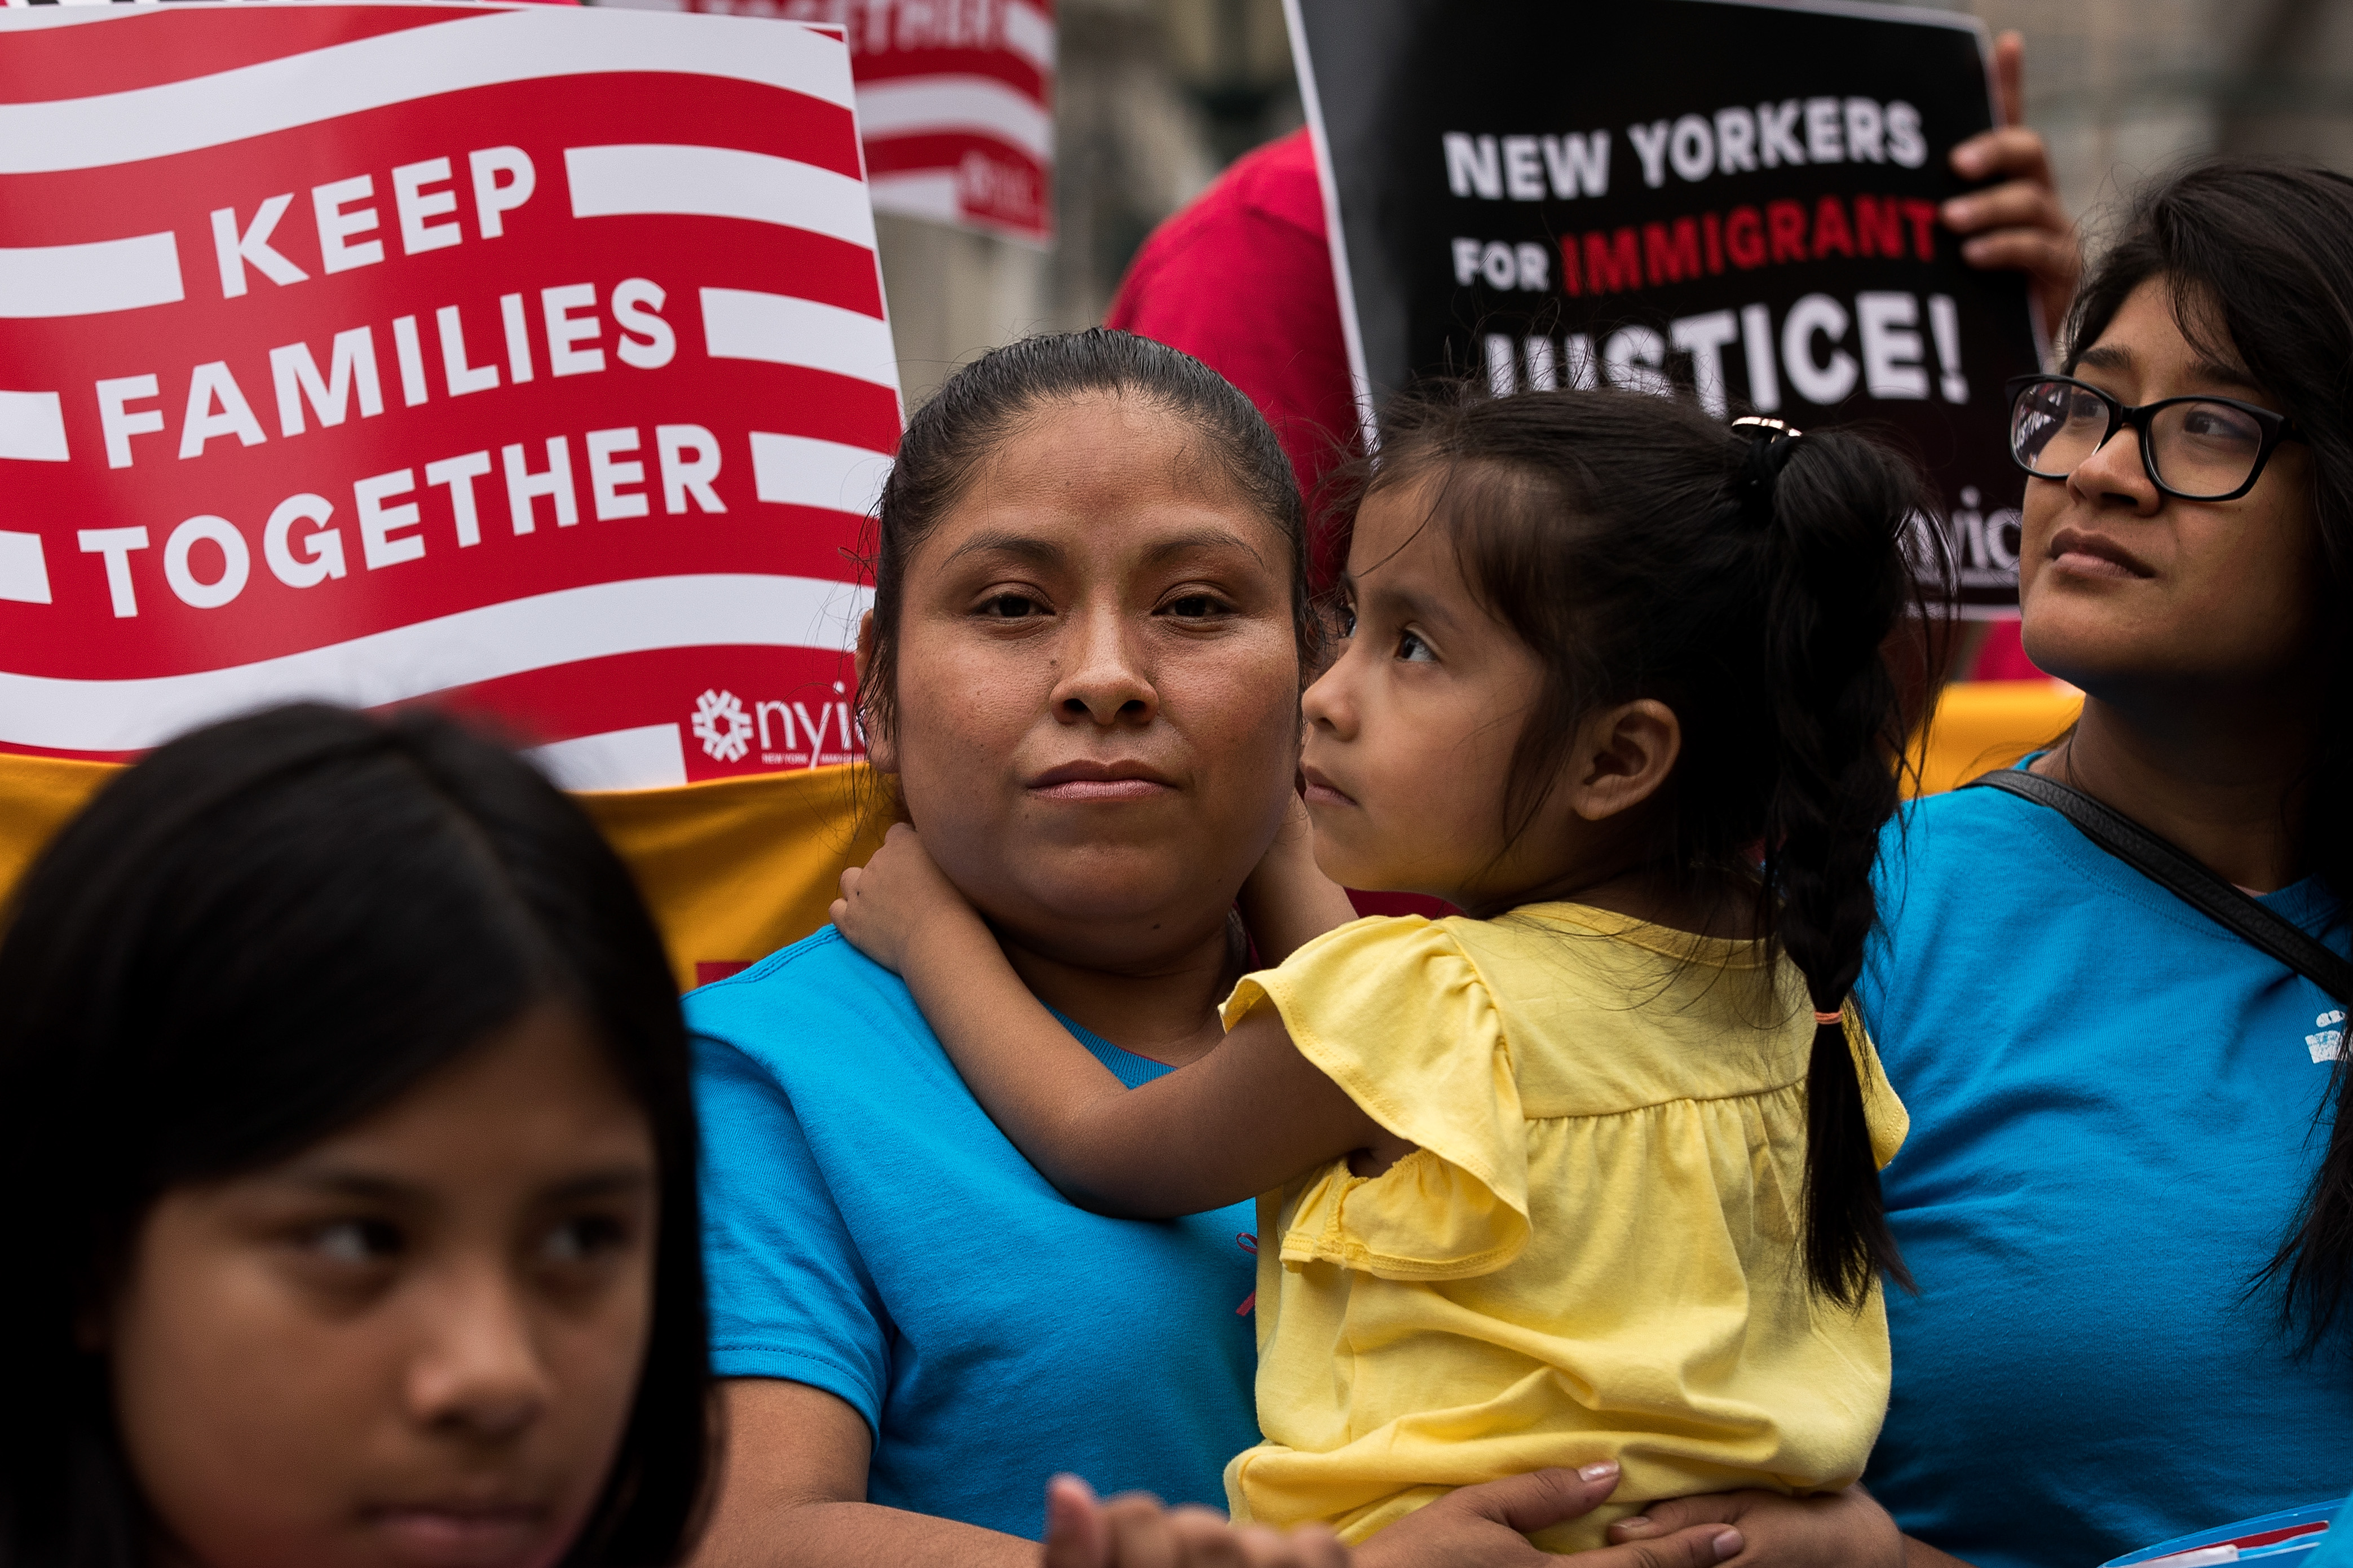 Activists Rally For Immigration Reform In Wake Of Supreme Court Decision